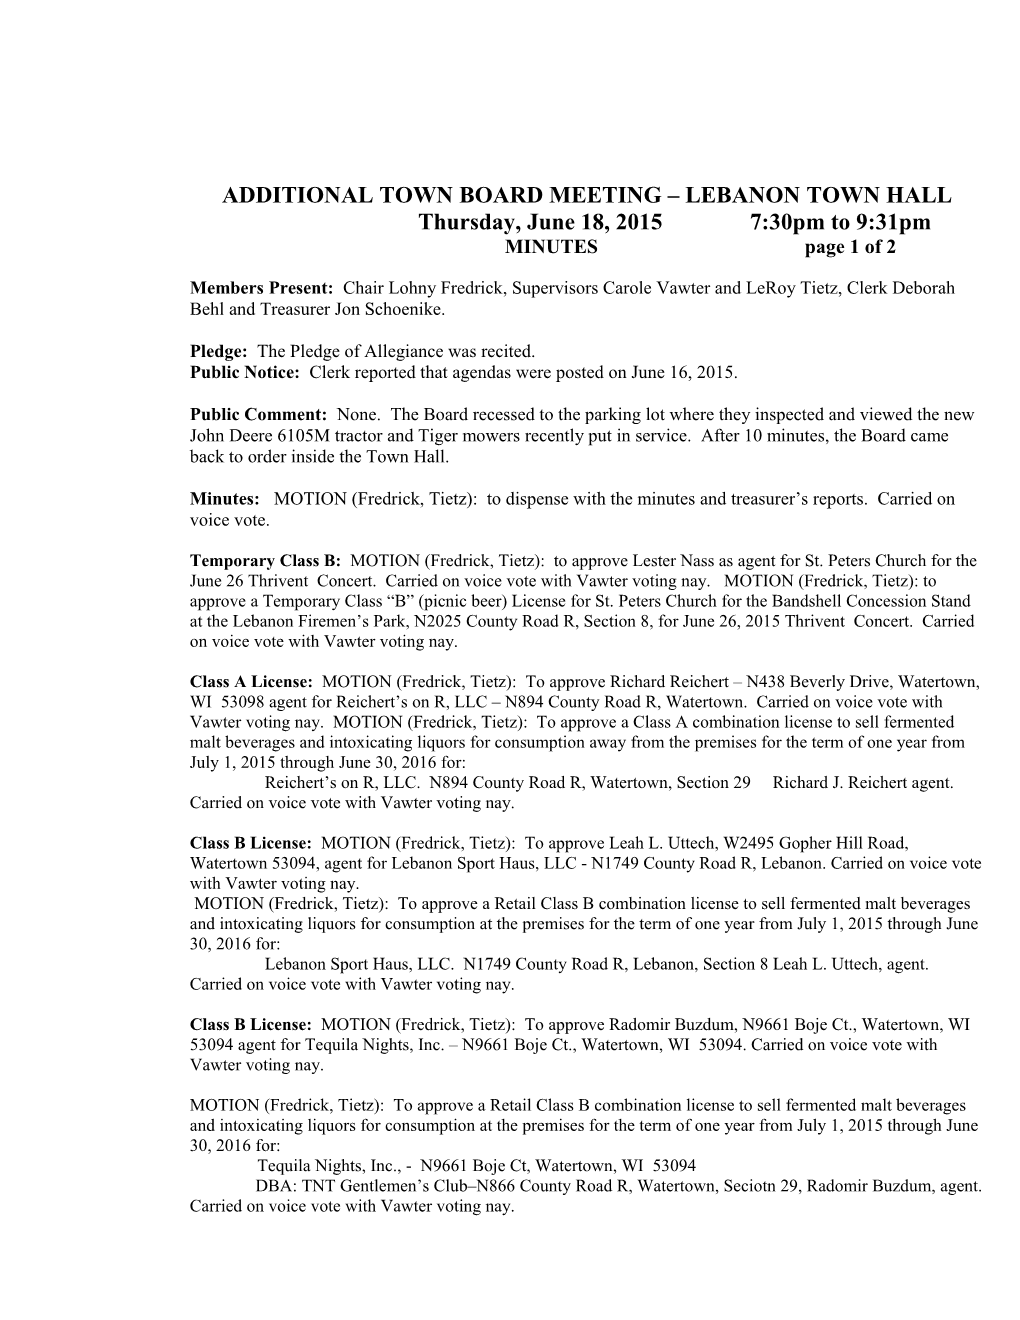 Additional Town Board Meeting Lebanon Town Hall